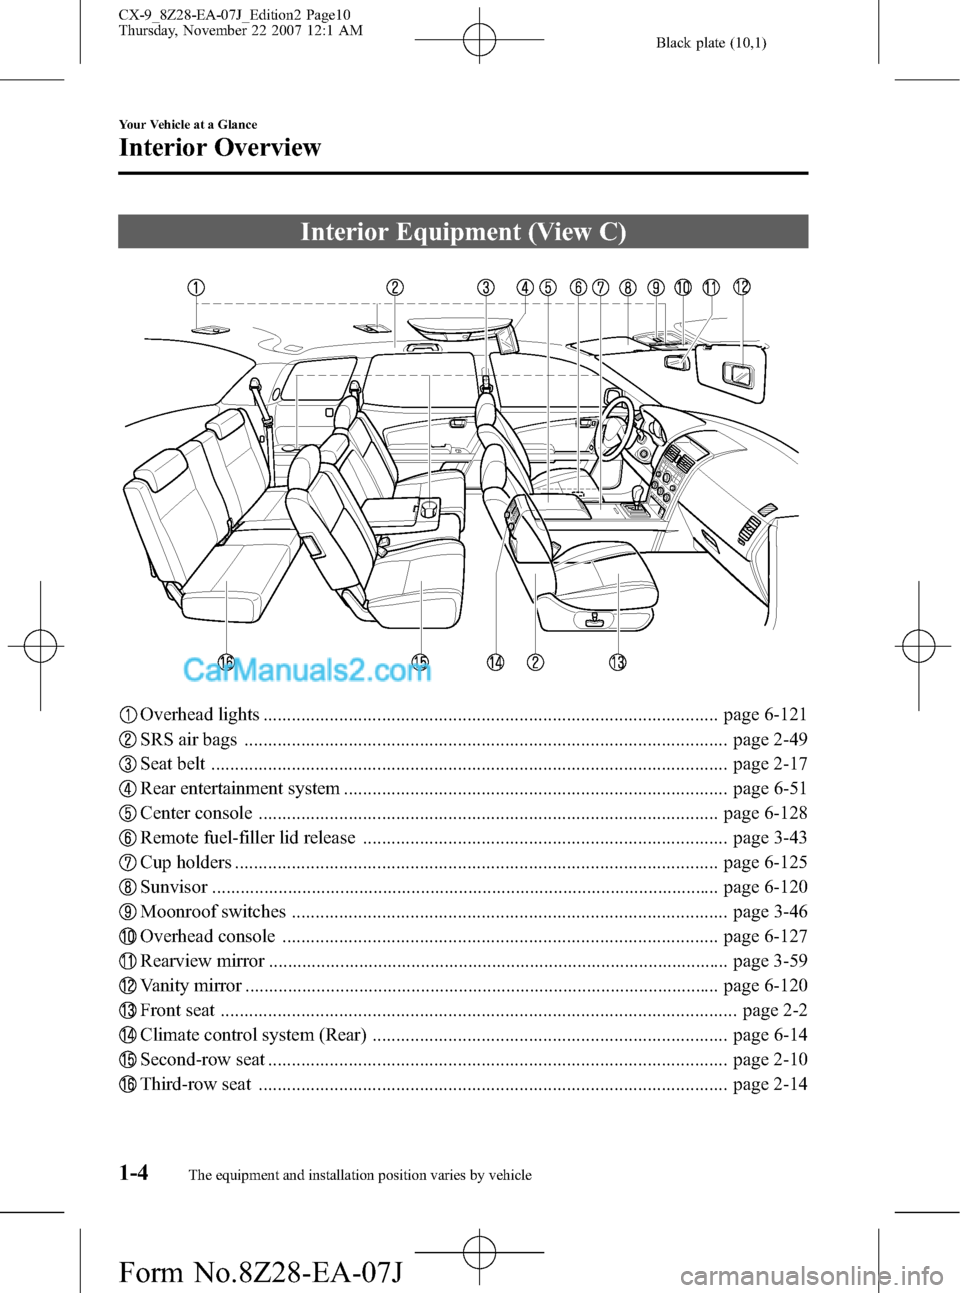 MAZDA MODEL CX-9 2008  Owners Manual (in English) Black plate (10,1)
Interior Equipment (View C)
Overhead lights ................................................................................................ page 6-121
SRS air bags ................